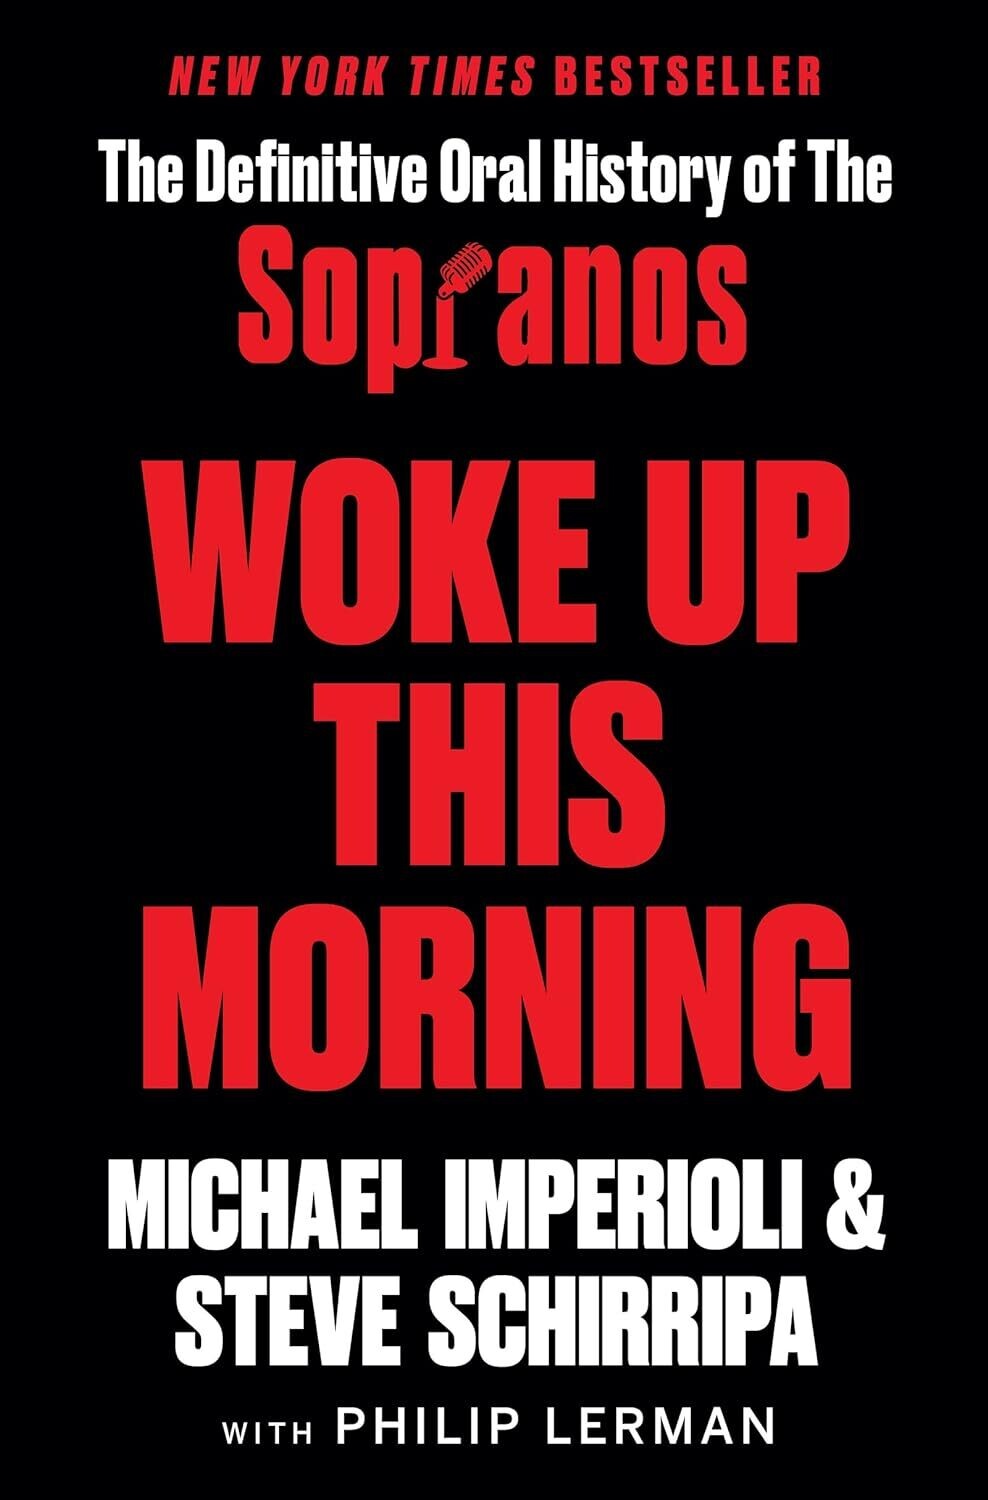 Woke Up This Morning: The Definitive Oral History of The Sopranos (Hardcover, NEW)